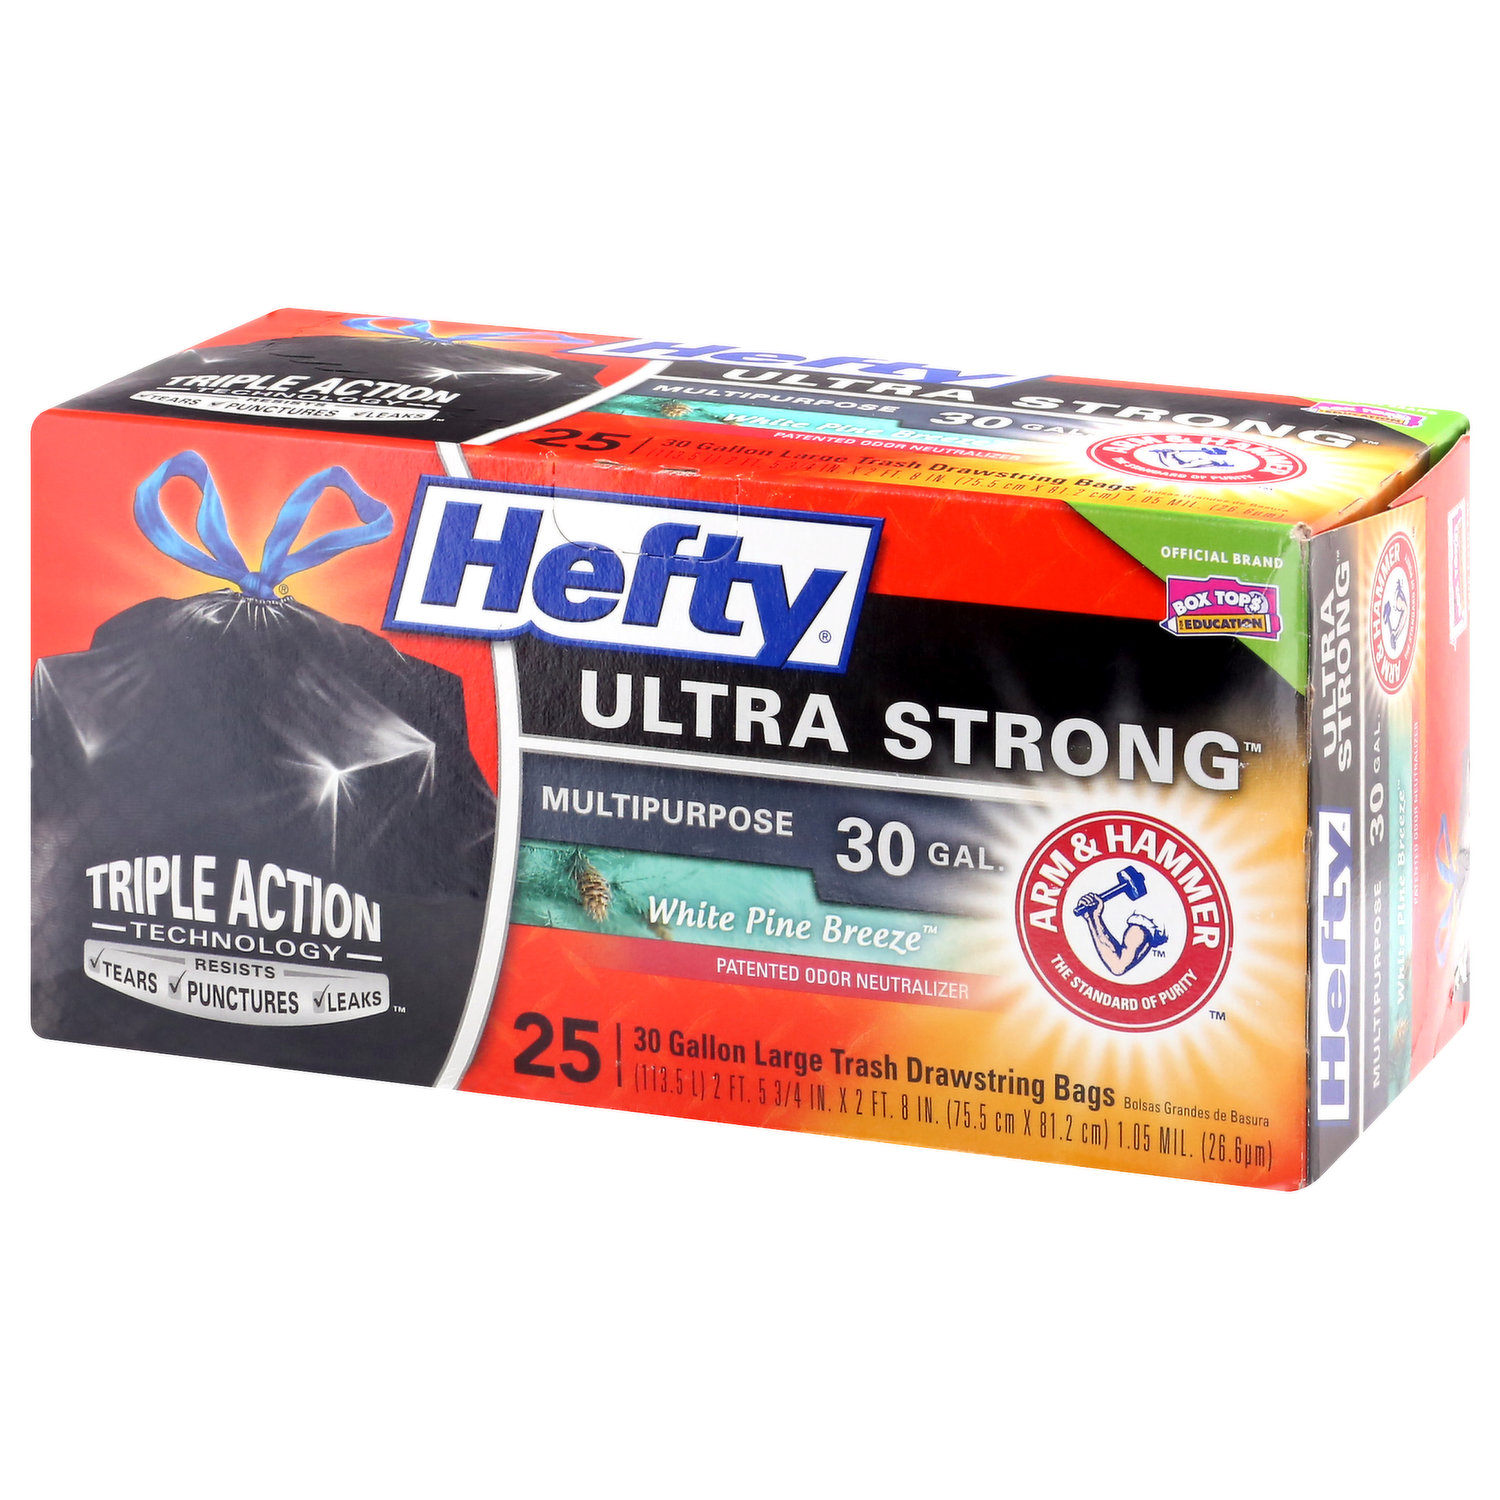 Hefty Ultra Strong Multipurpose Large Trash Bags, Black, White Pine Breeze  Scent, 30 Gallon, 25 Count 25 Count (Pack of 1) White Pine Breeze - 25 Count